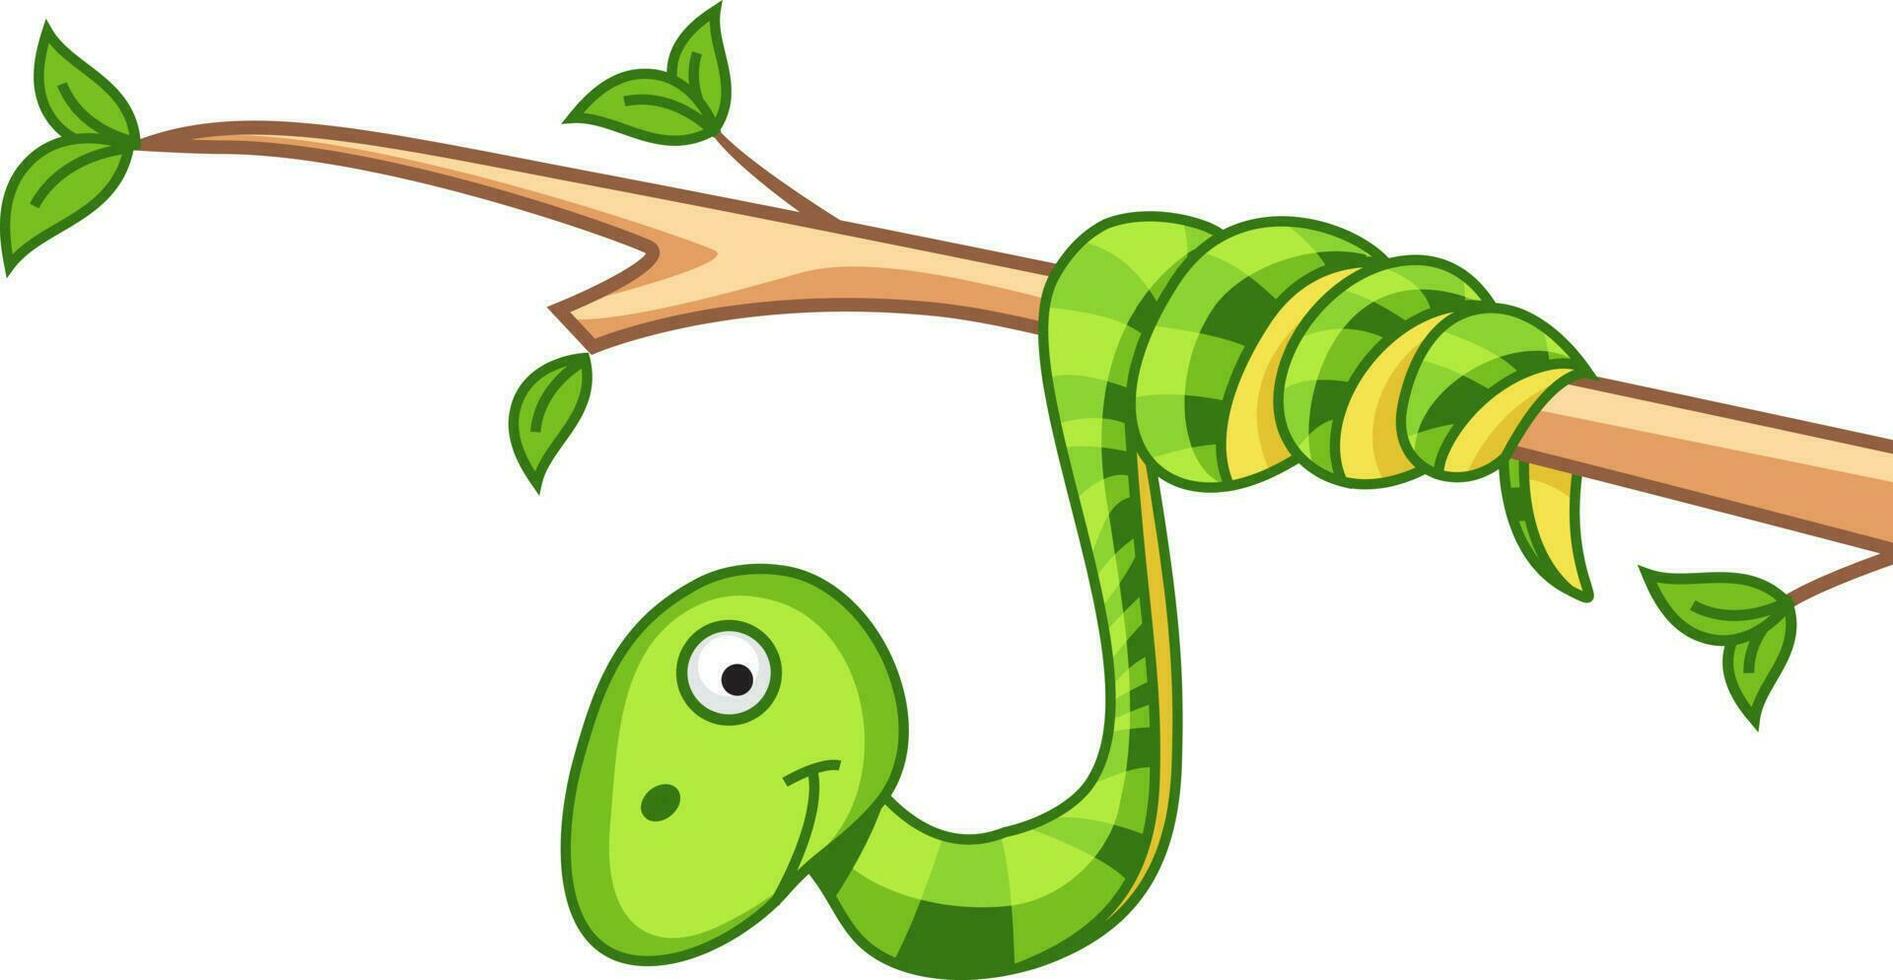 Cartoon character of snake on tree branch. vector